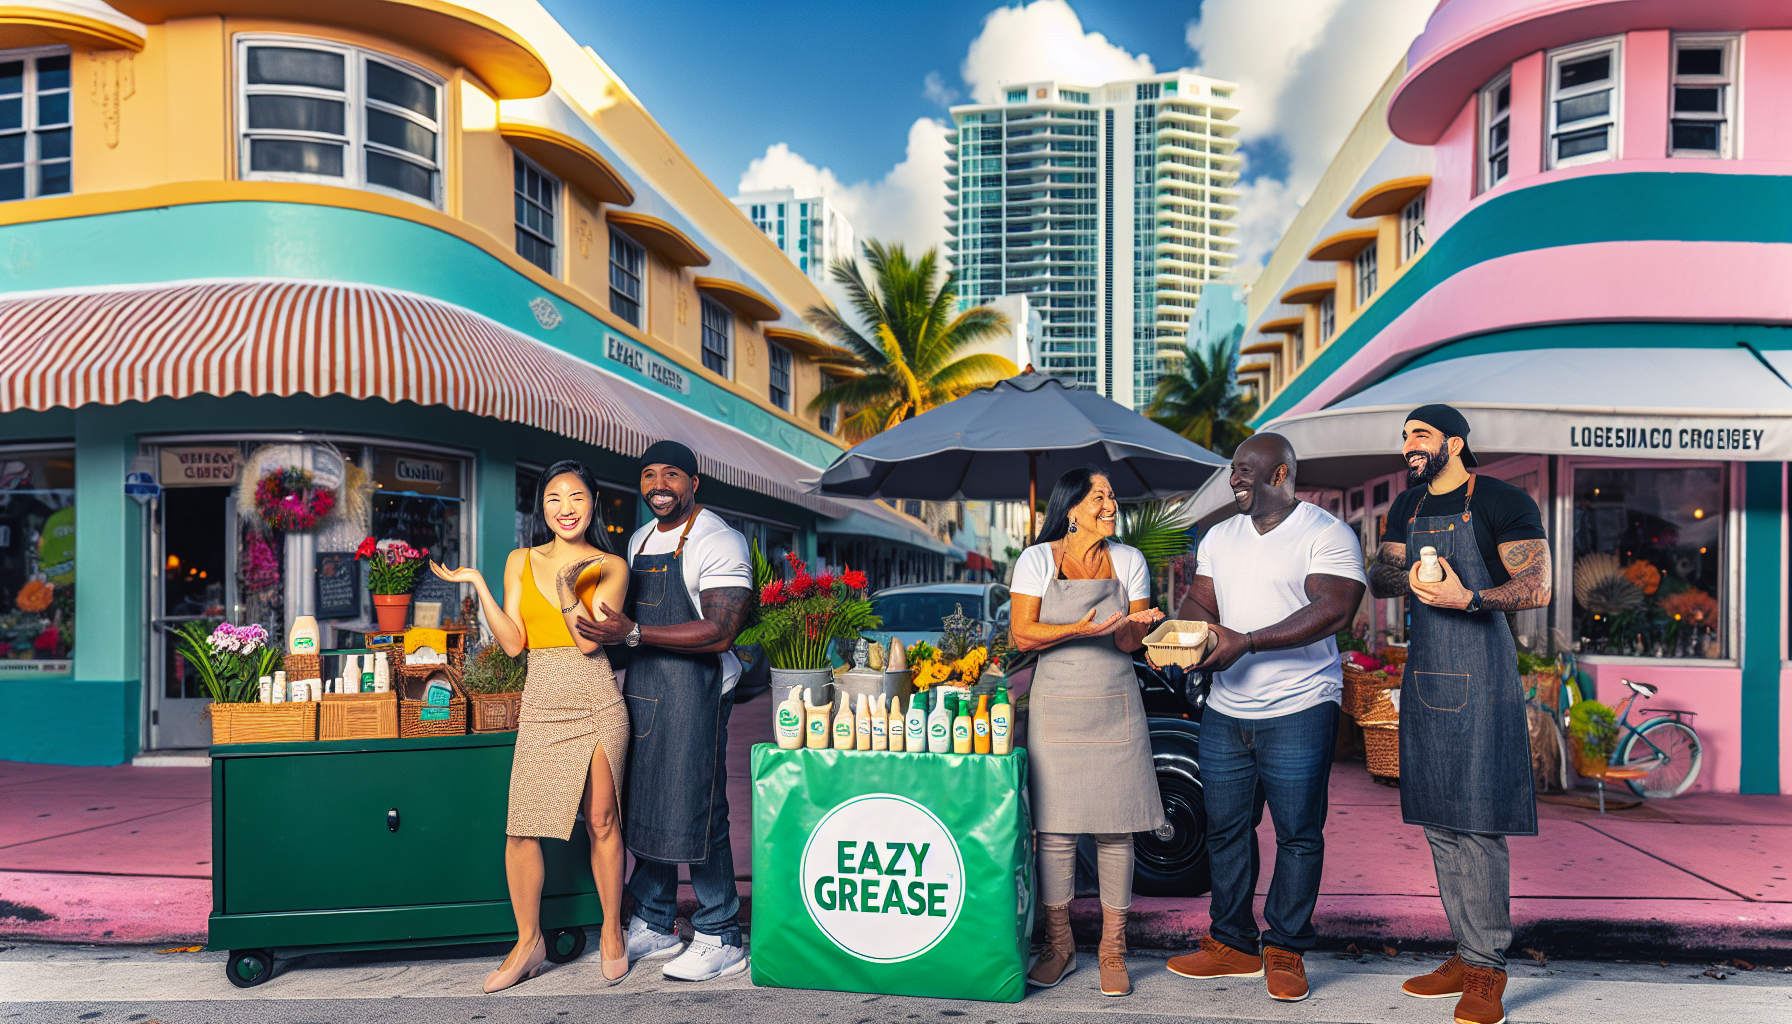 Eazy Grease team collaborating with Miami's businesses